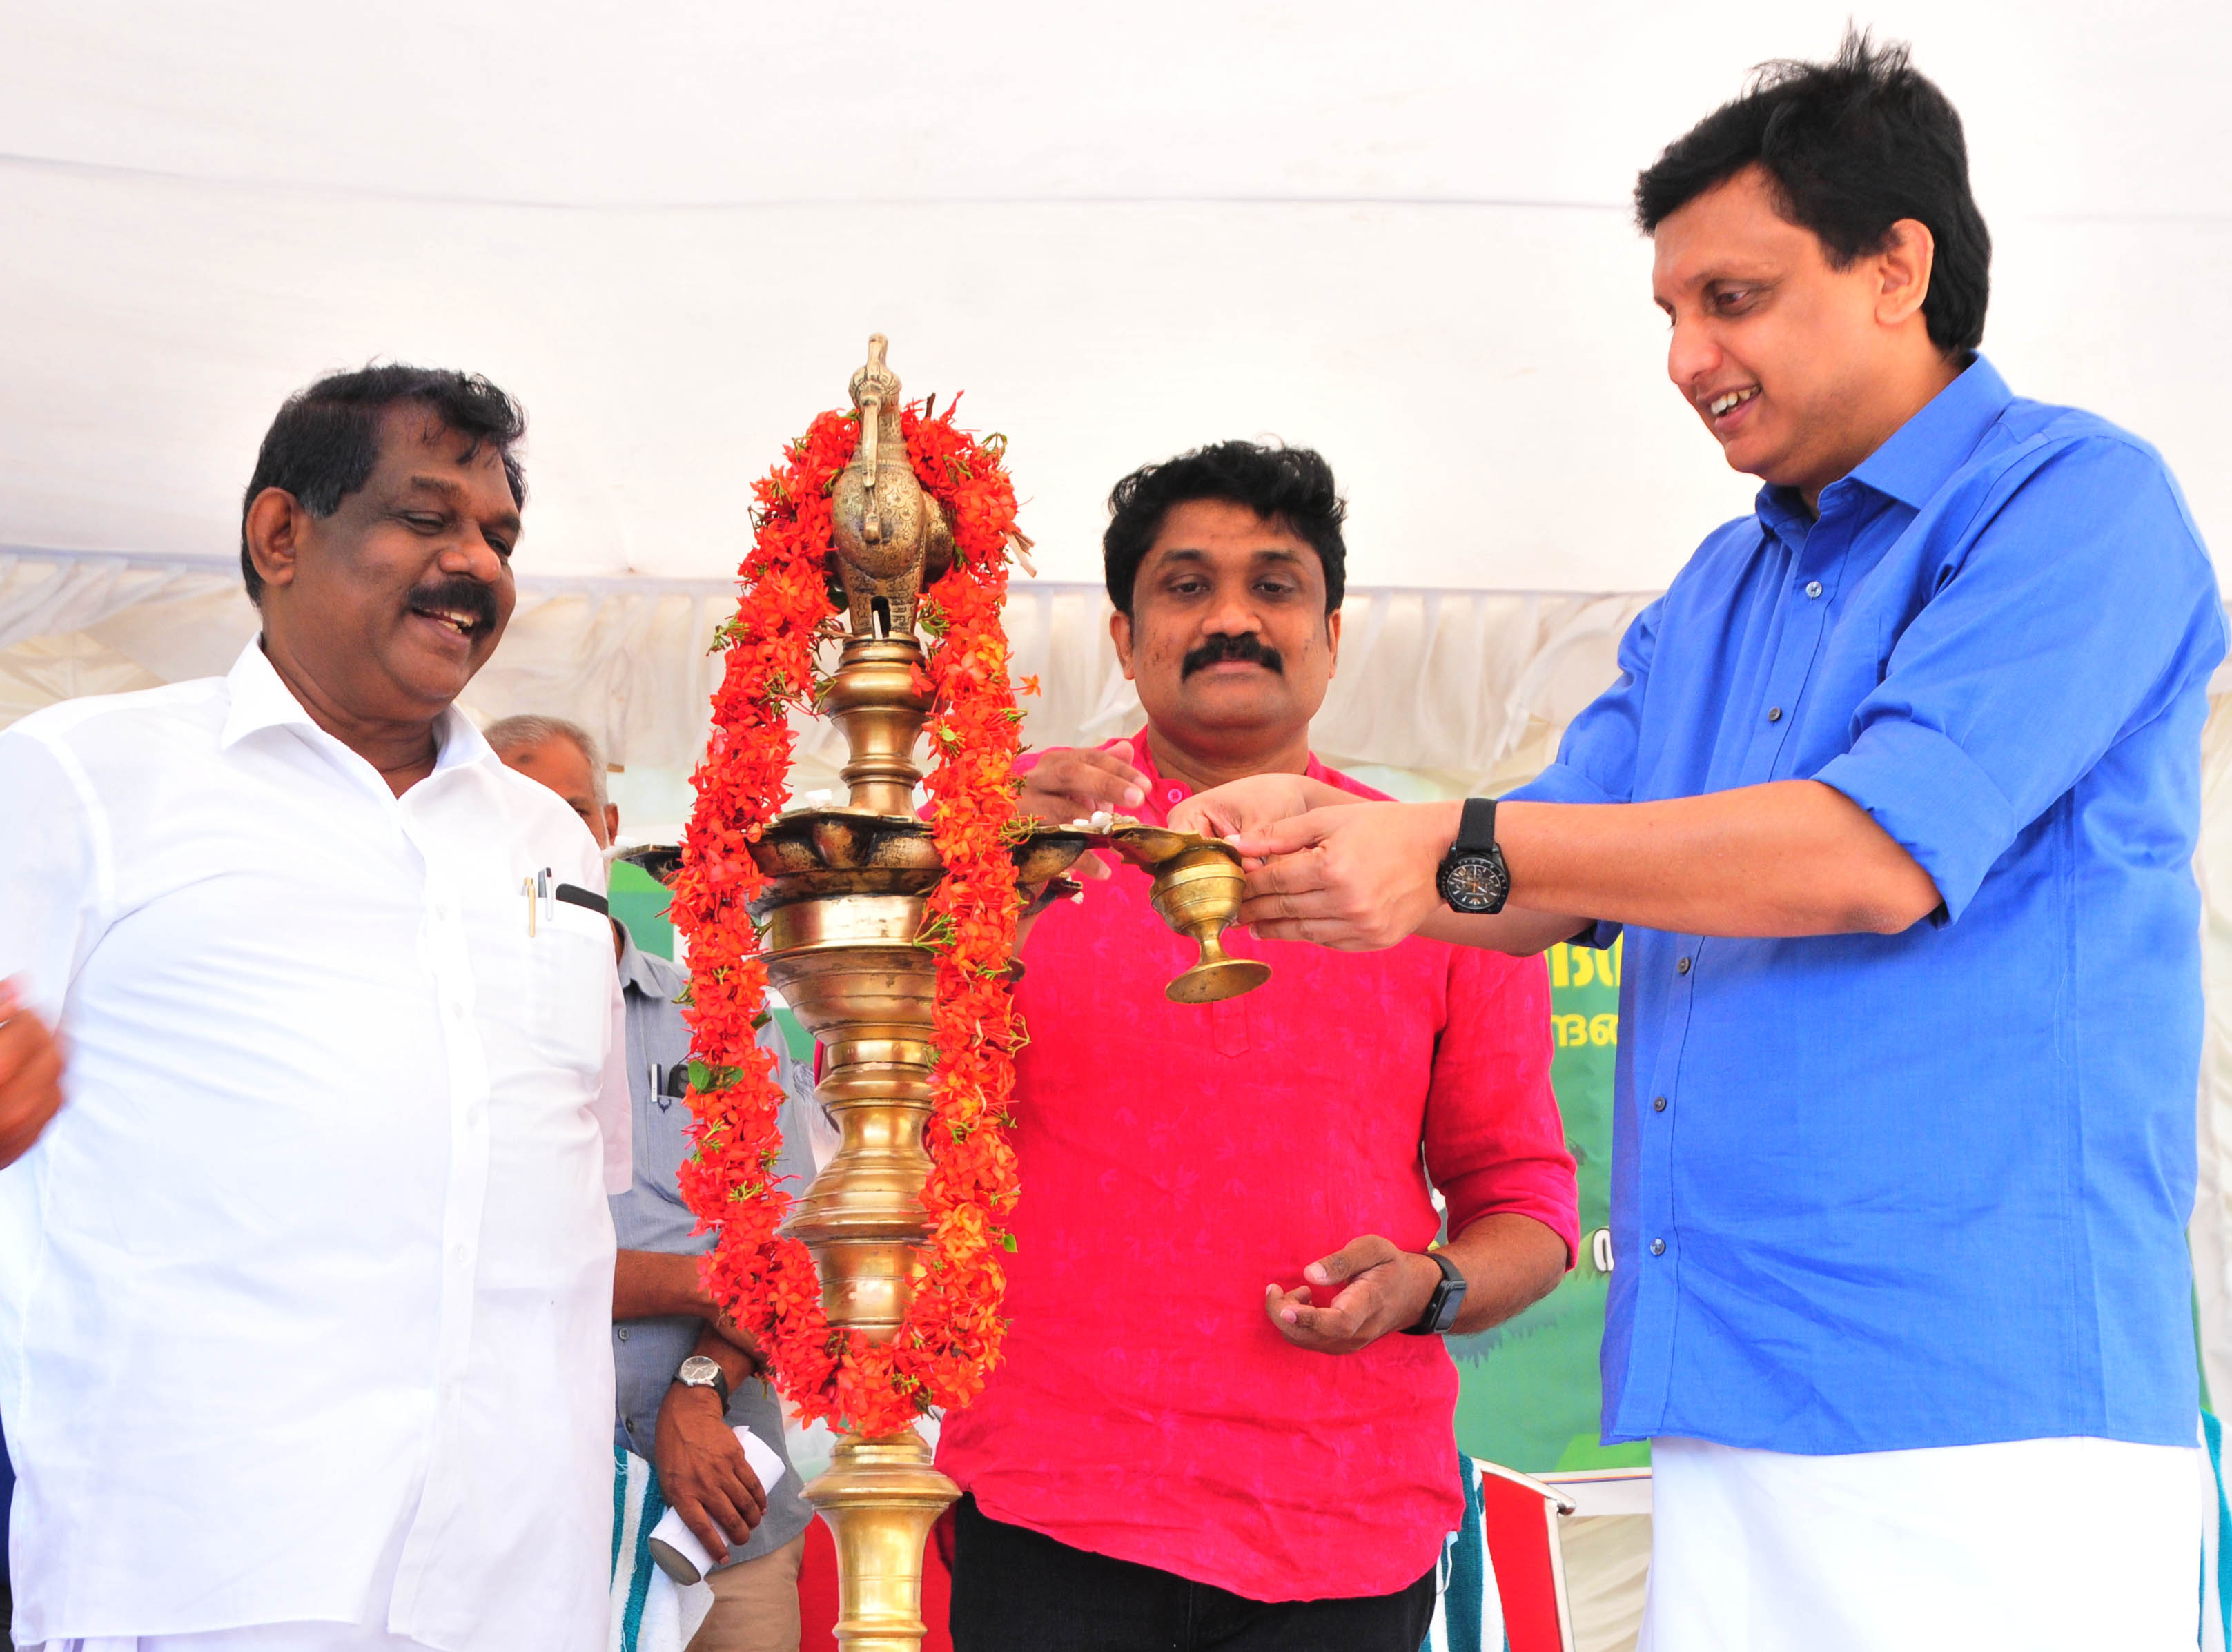 Keeping tourism centres clean and hygienic vital, says Minister Riyas